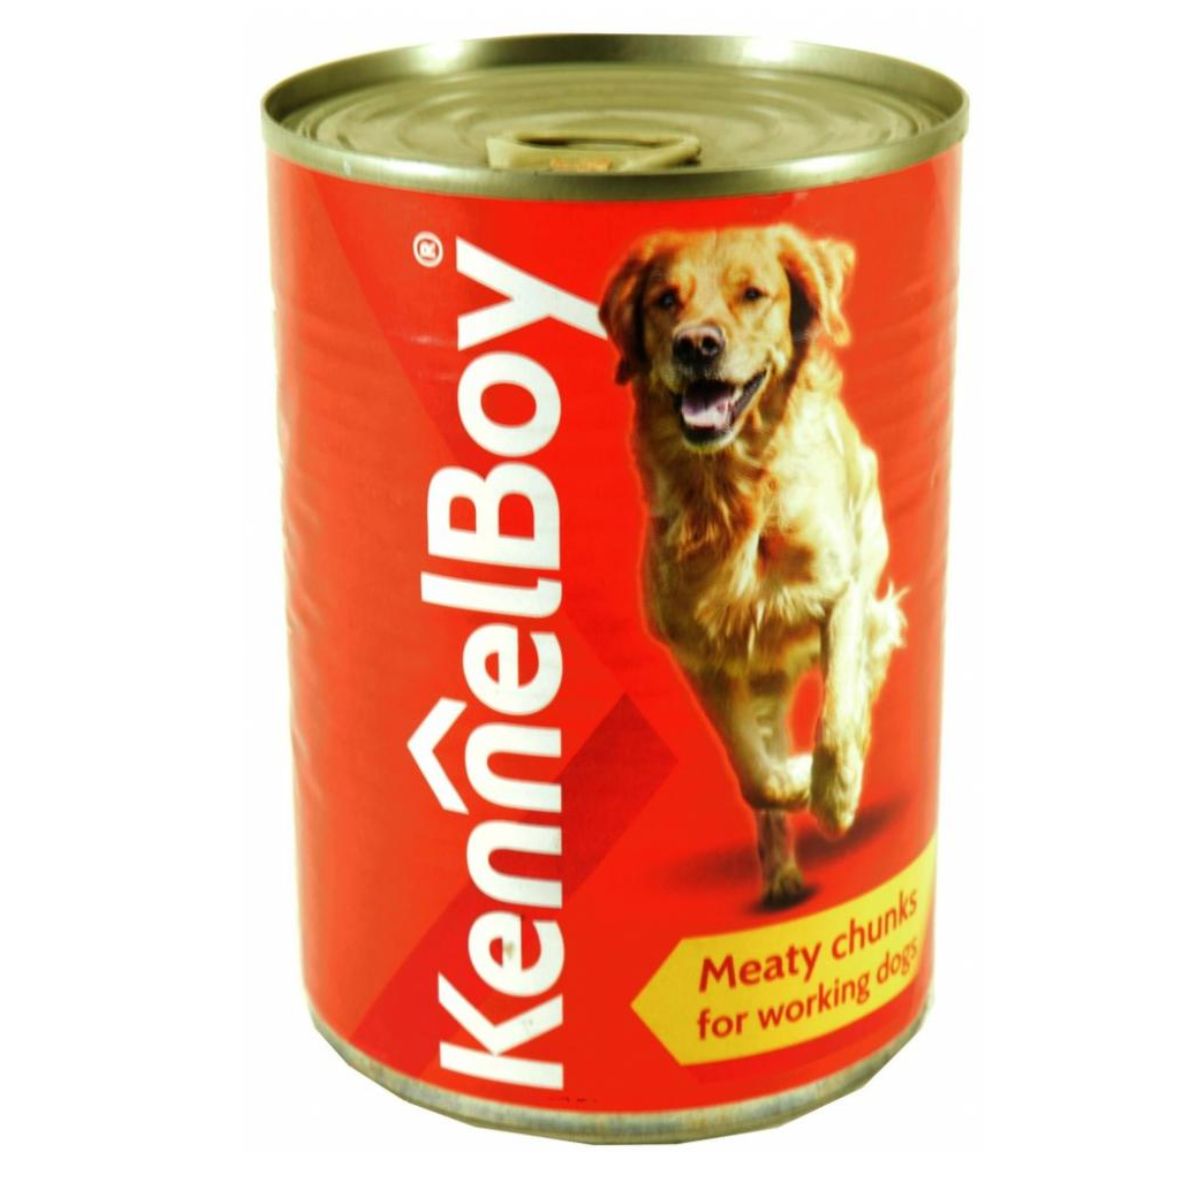 Kennelboy - Meaty Chunks For Working Dogs - 400g in a can.